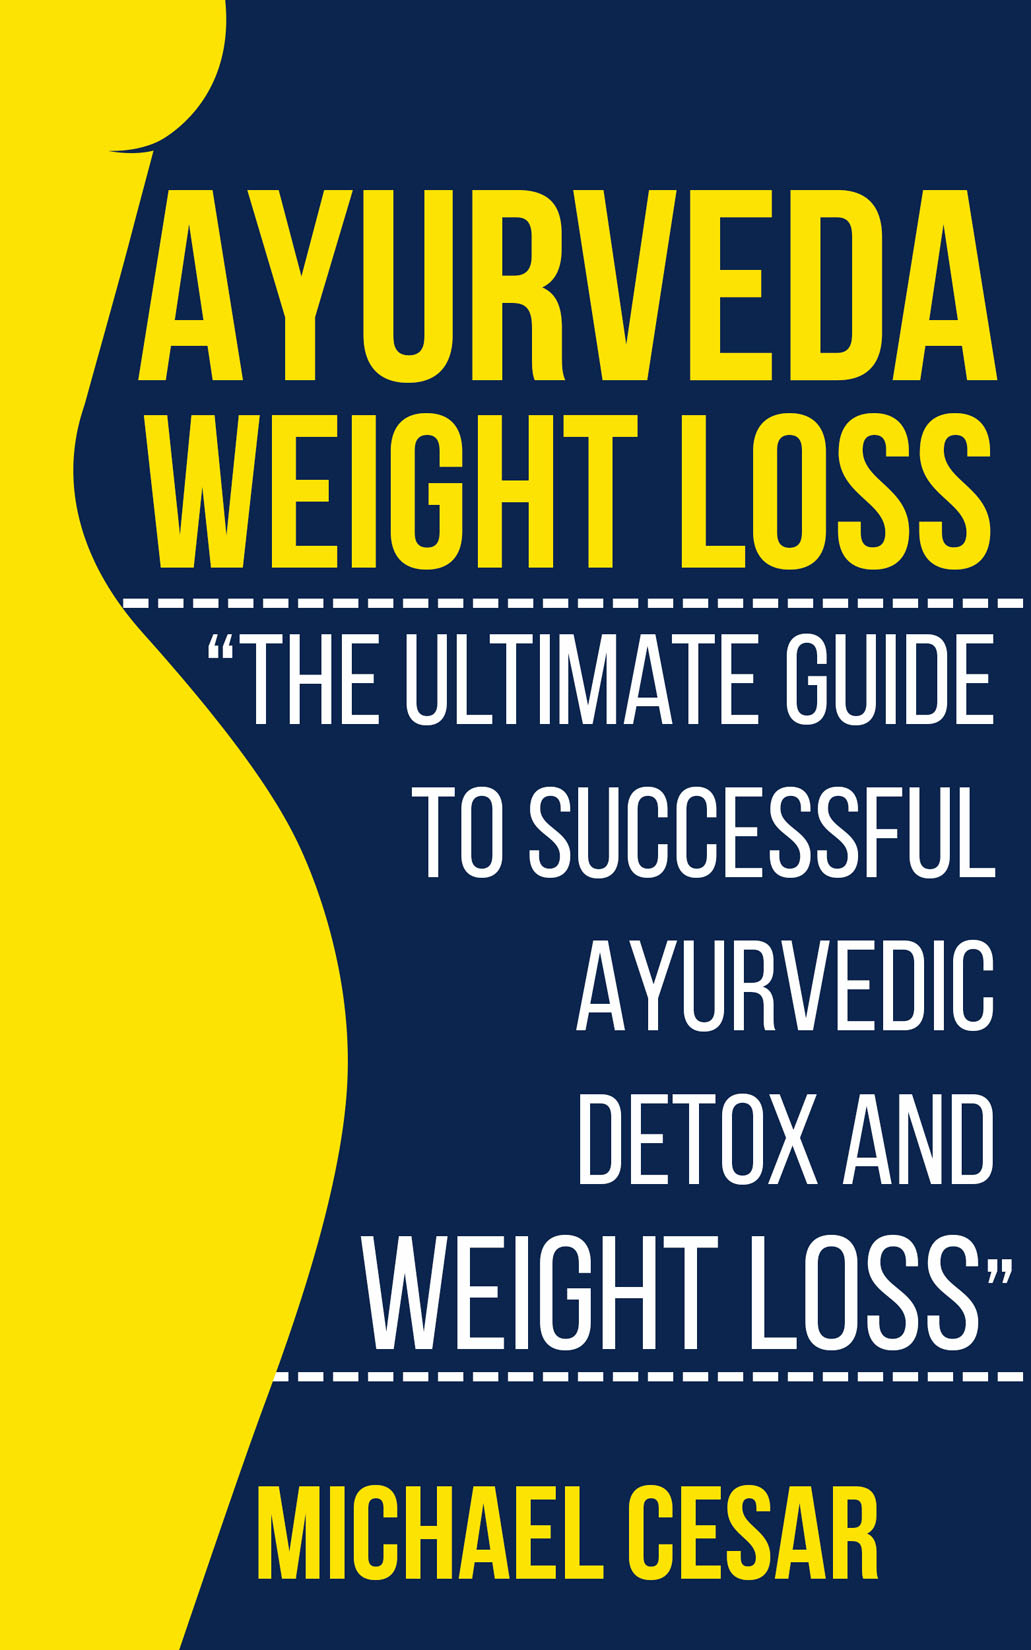 FREE: Ayurveda Weight Loss: The Ultimate Guide to Successful Ayurvedic Detox and Weight Loss by Michael Cesar